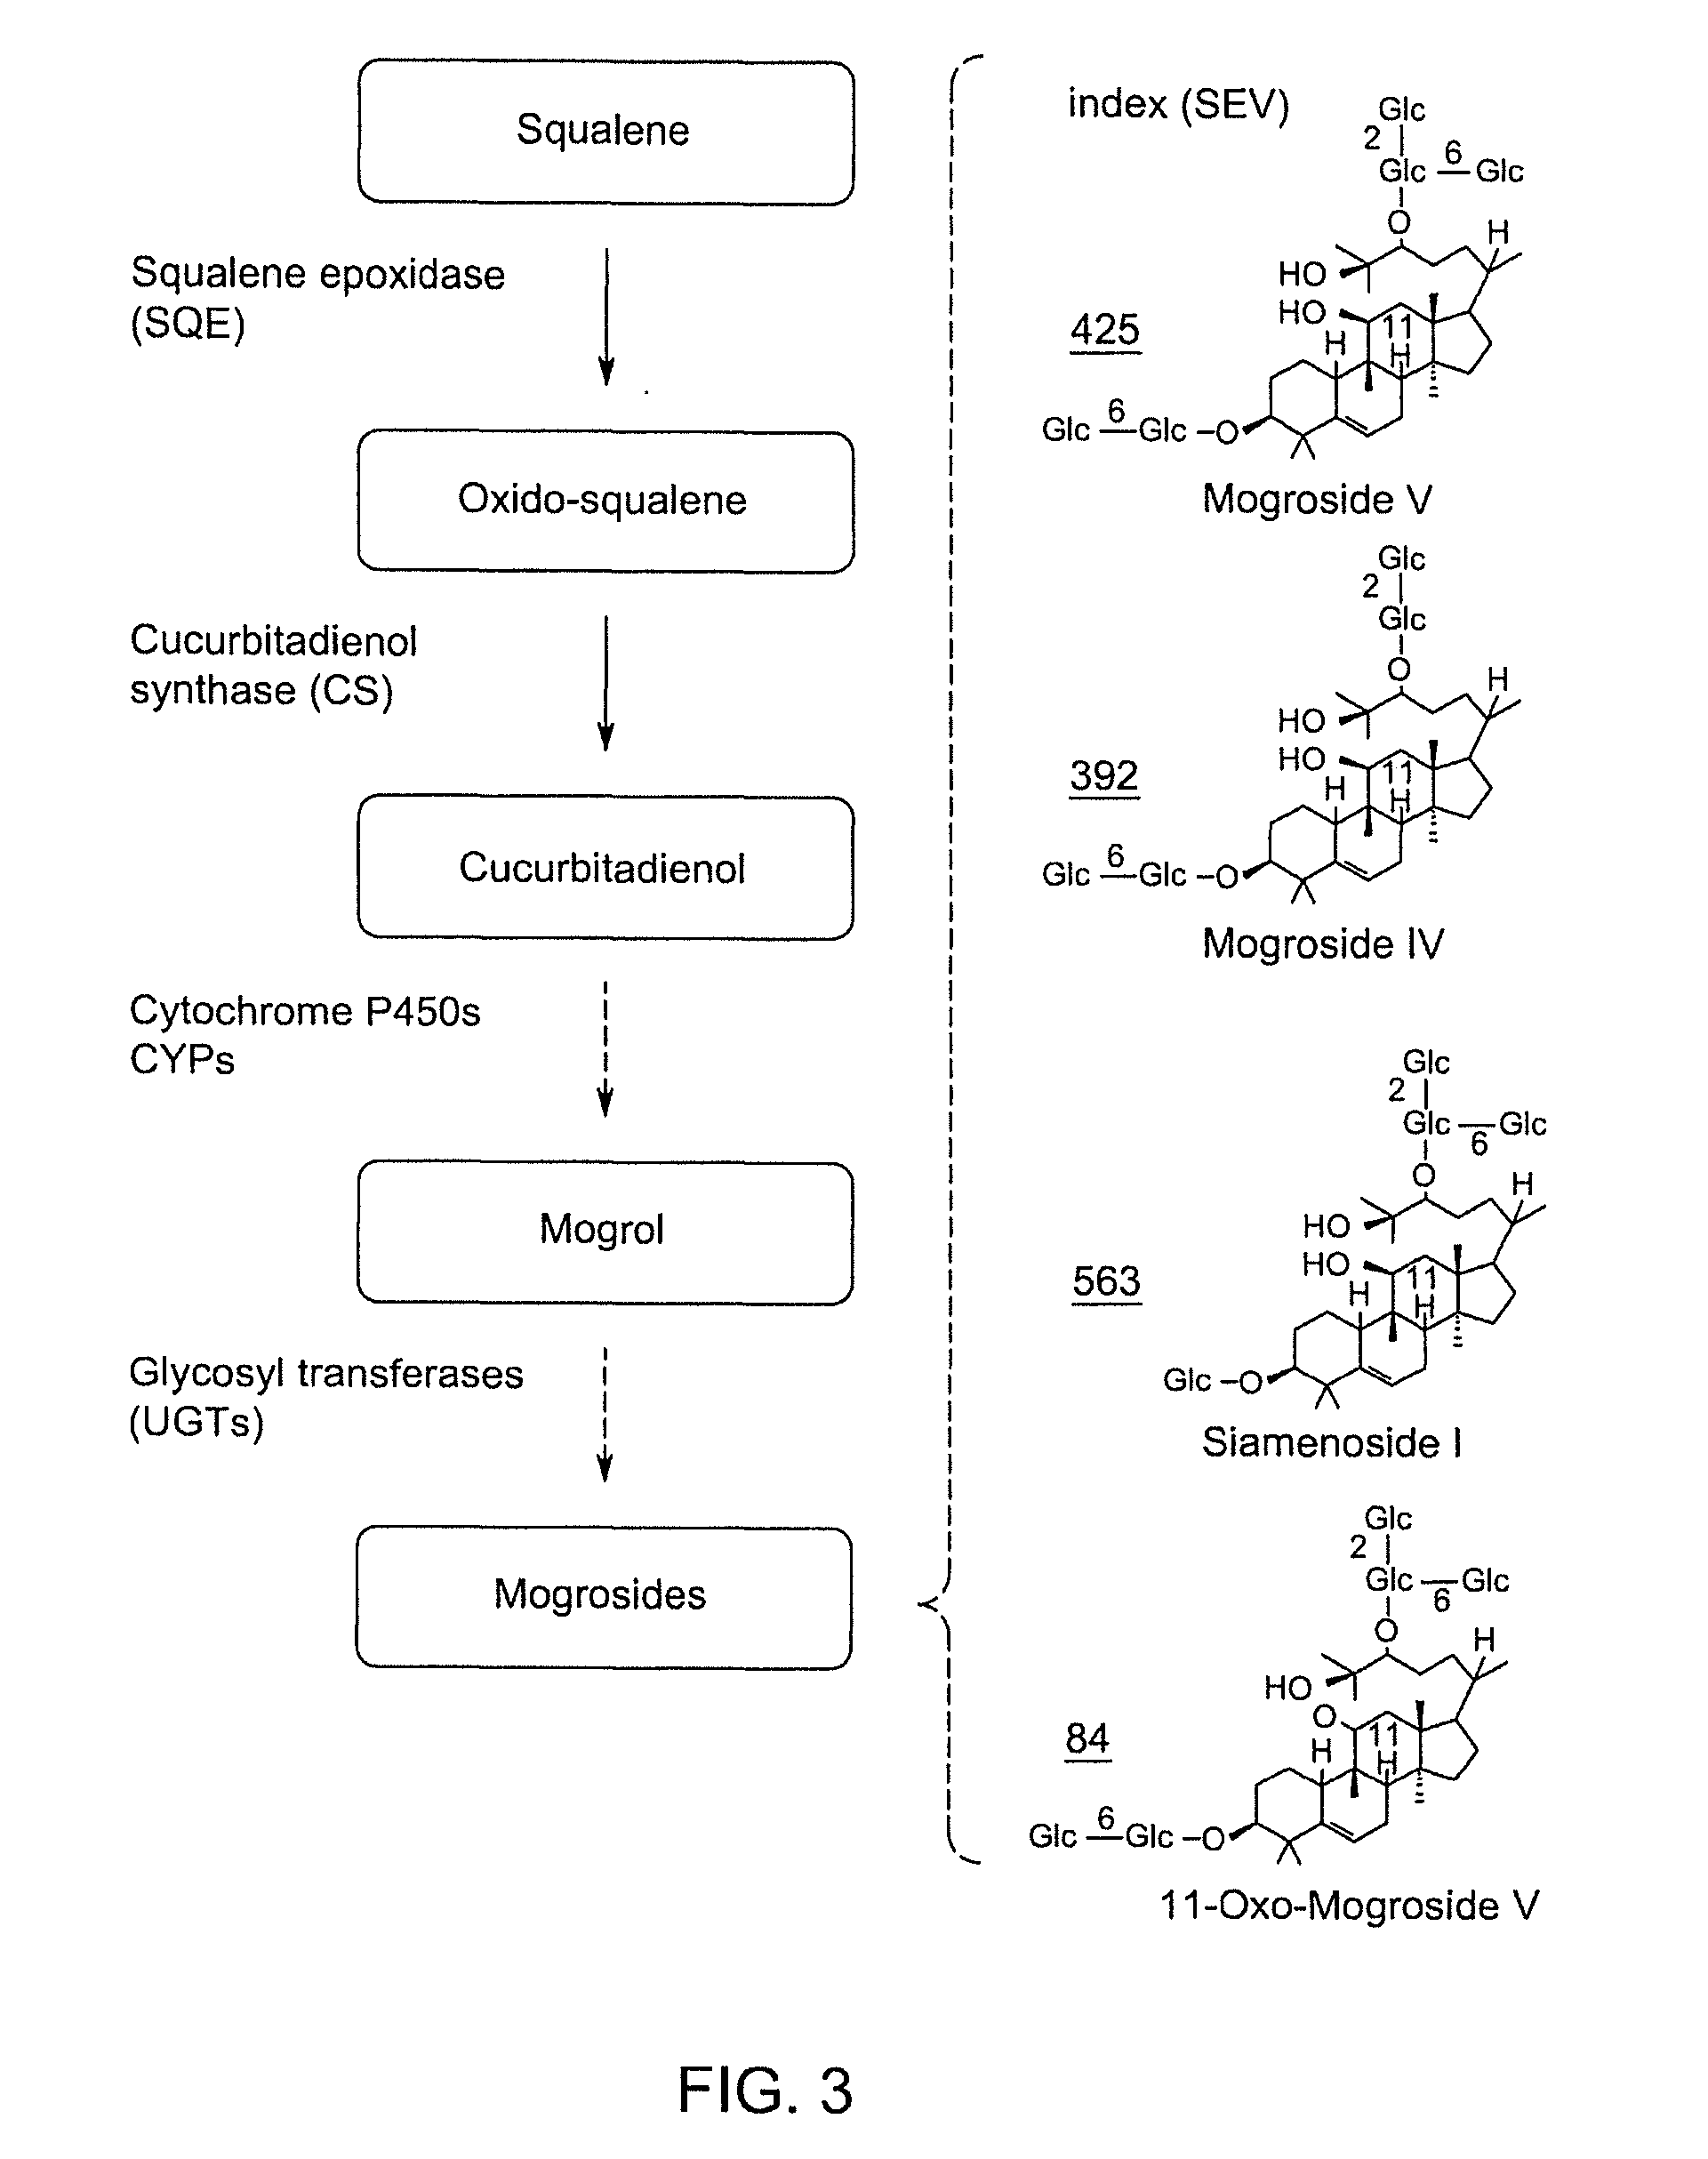 Methods and Materials for Biosynthesis of Mogroside Compounds